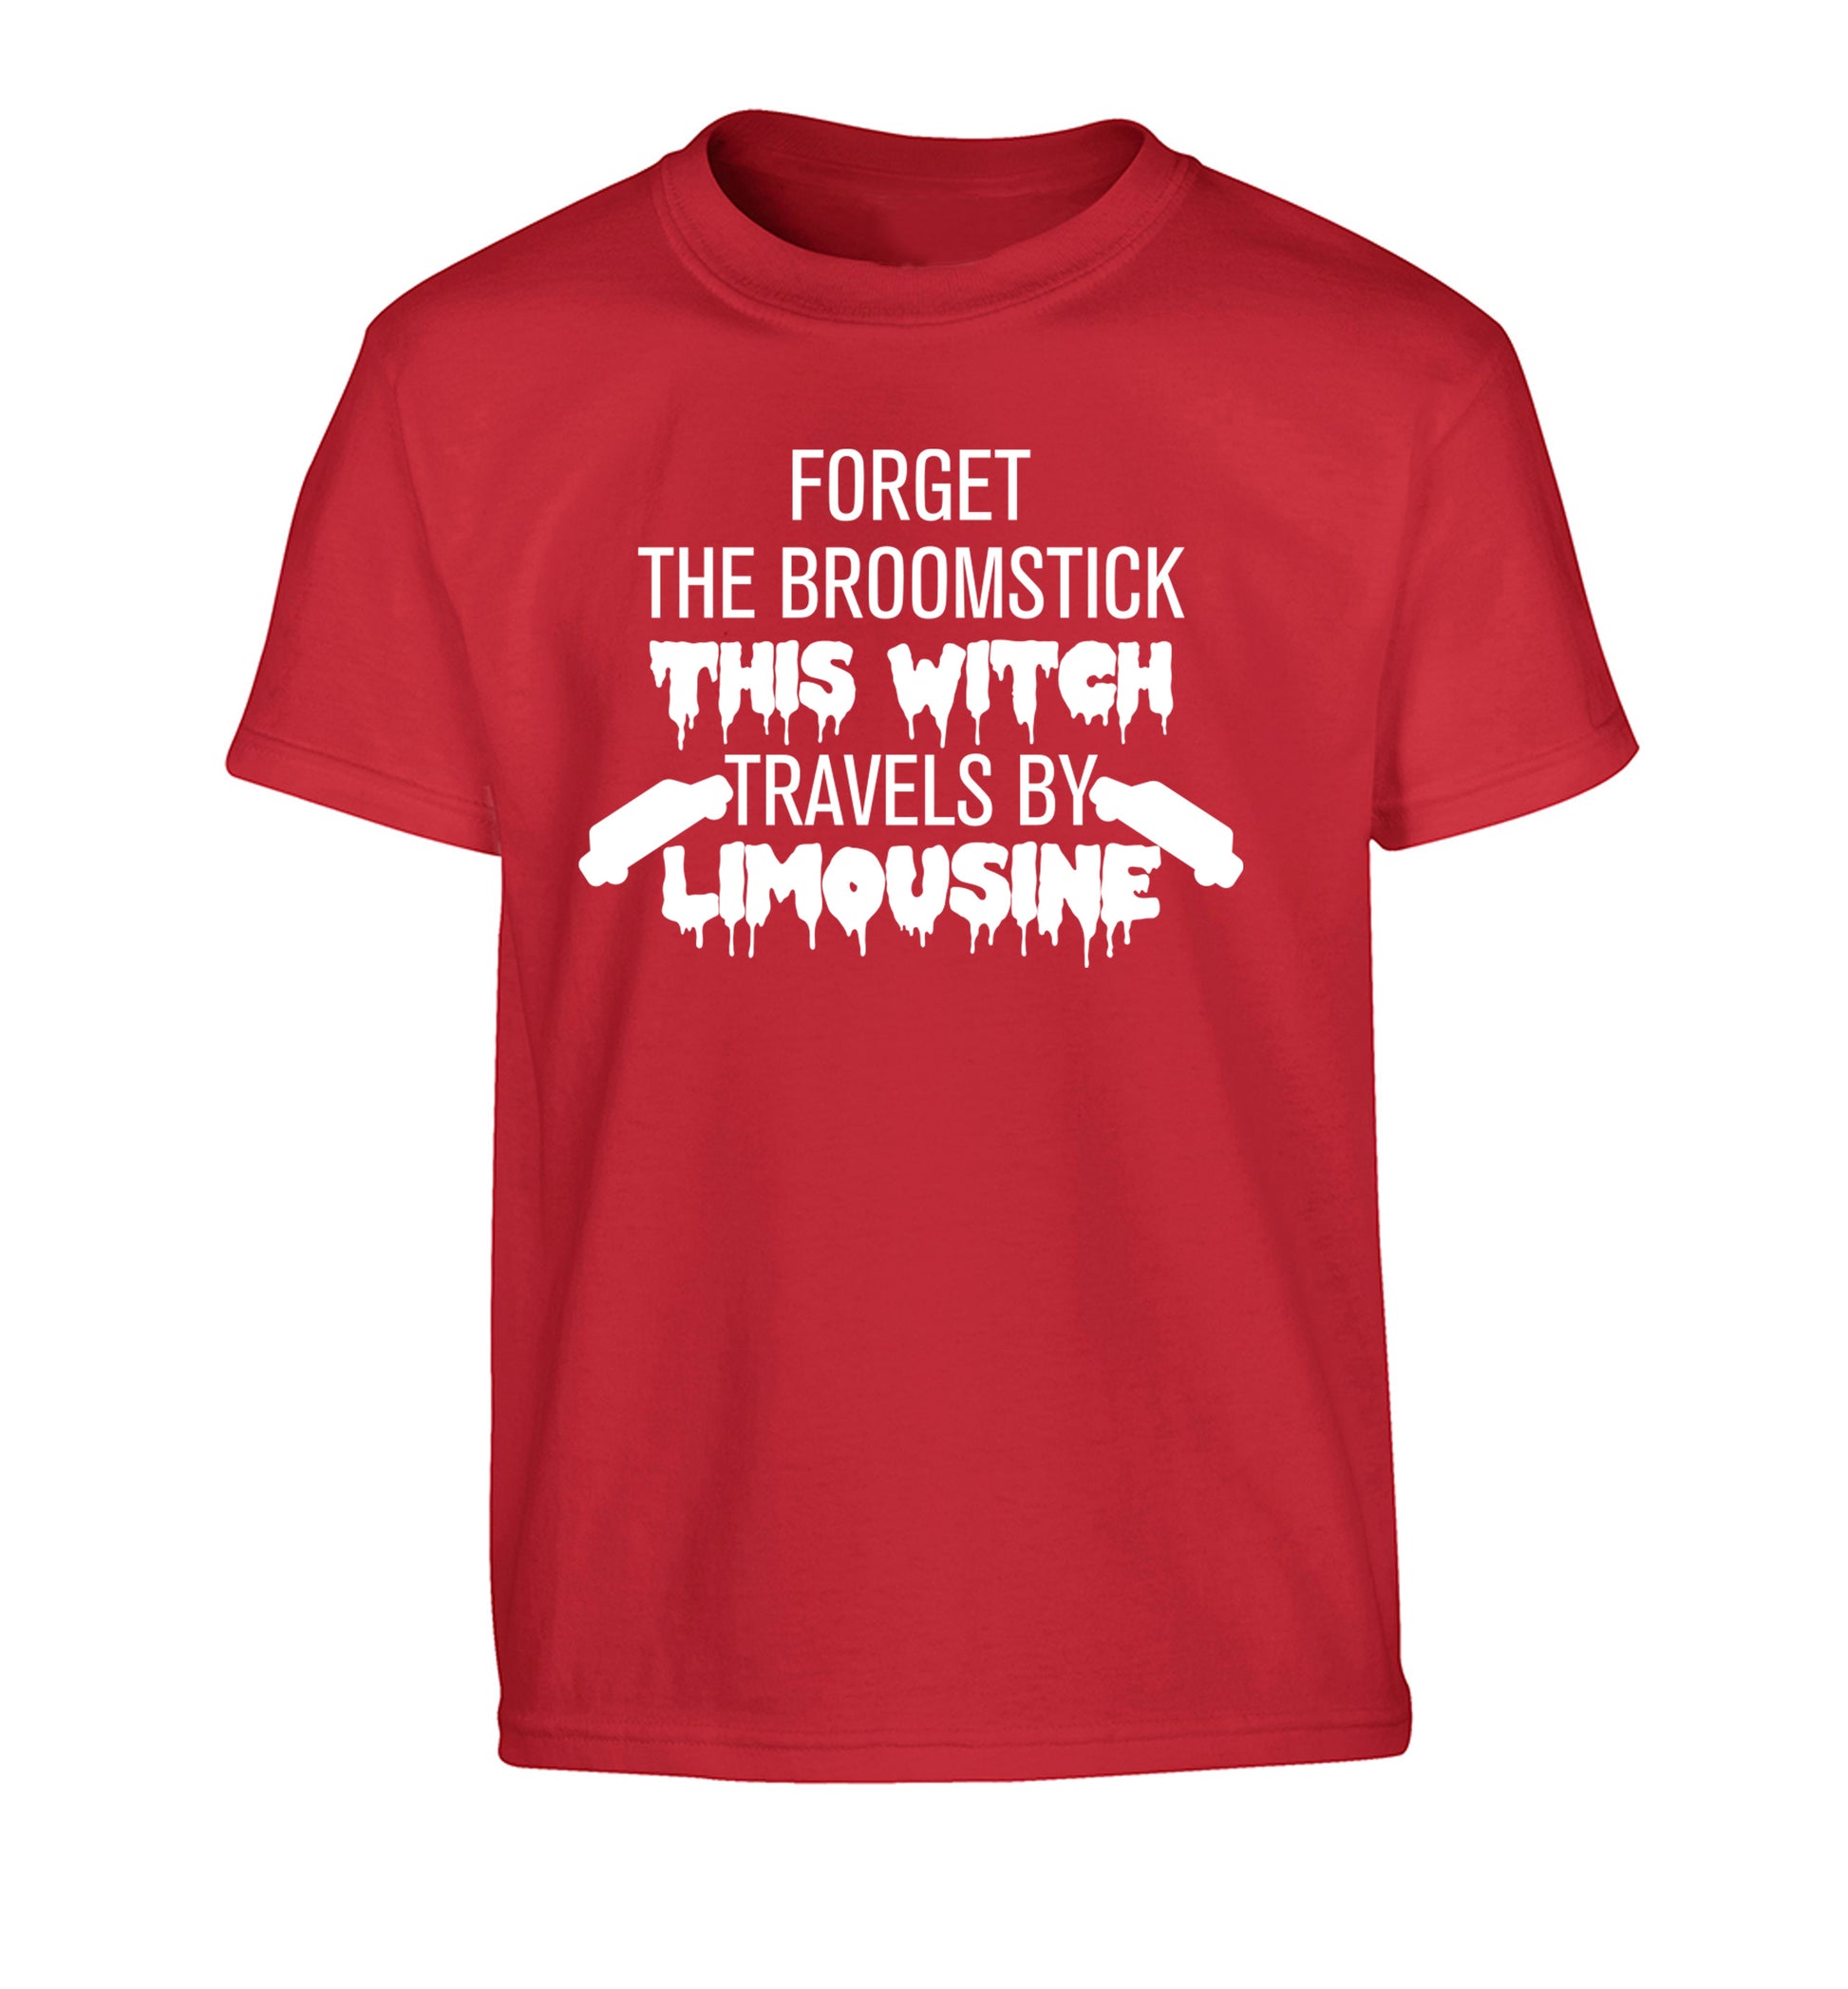 Forget the broomstick this witch travels by limousine Children's red Tshirt 12-14 Years